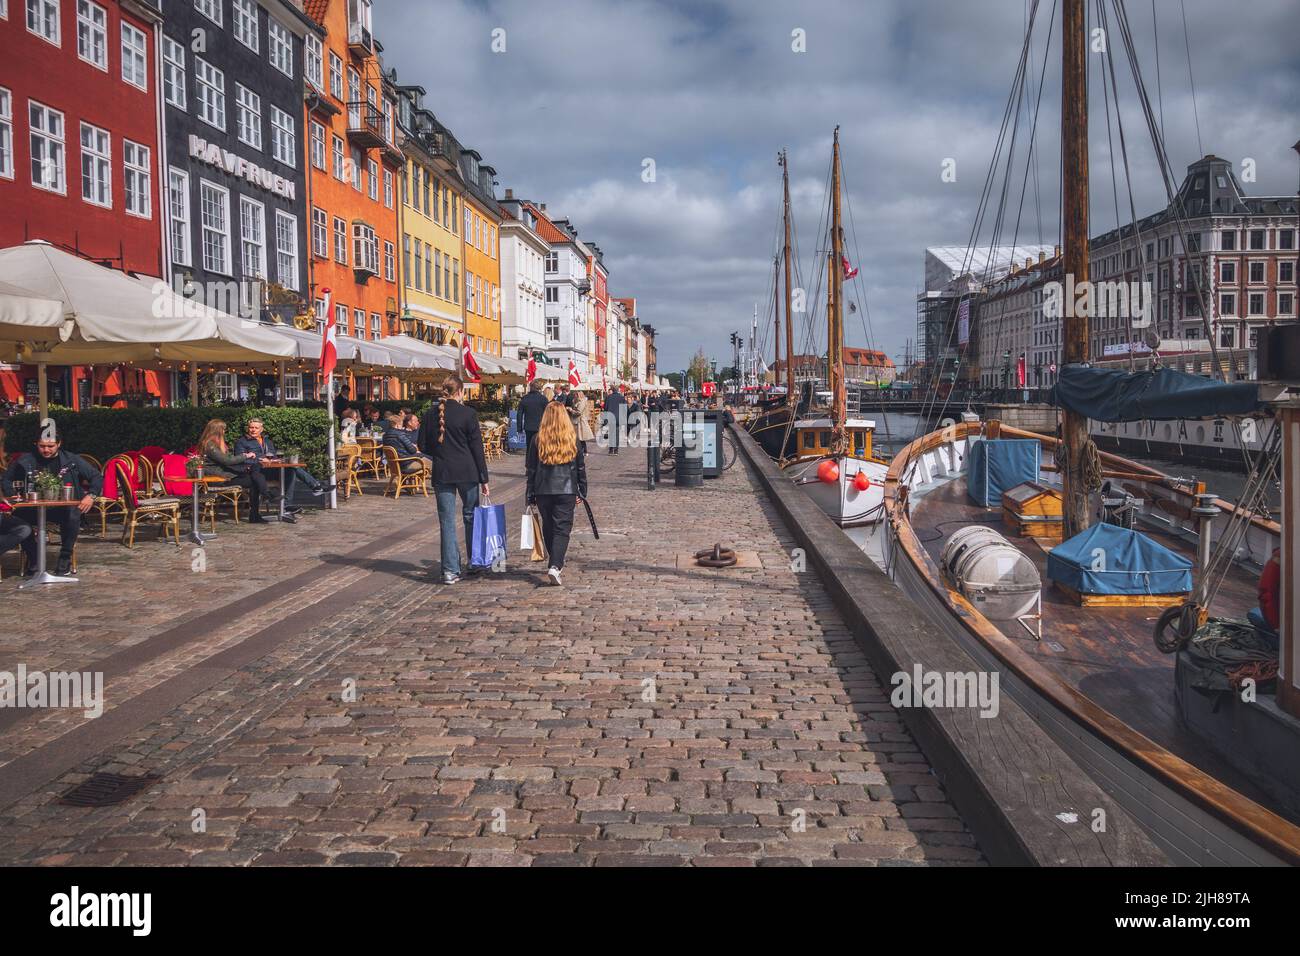 People walking and sitting on the terrace on Nyhavn street in Copenhagen along the bars, cafes and restaurants and wooden ships on the canal harbour. Stock Photo